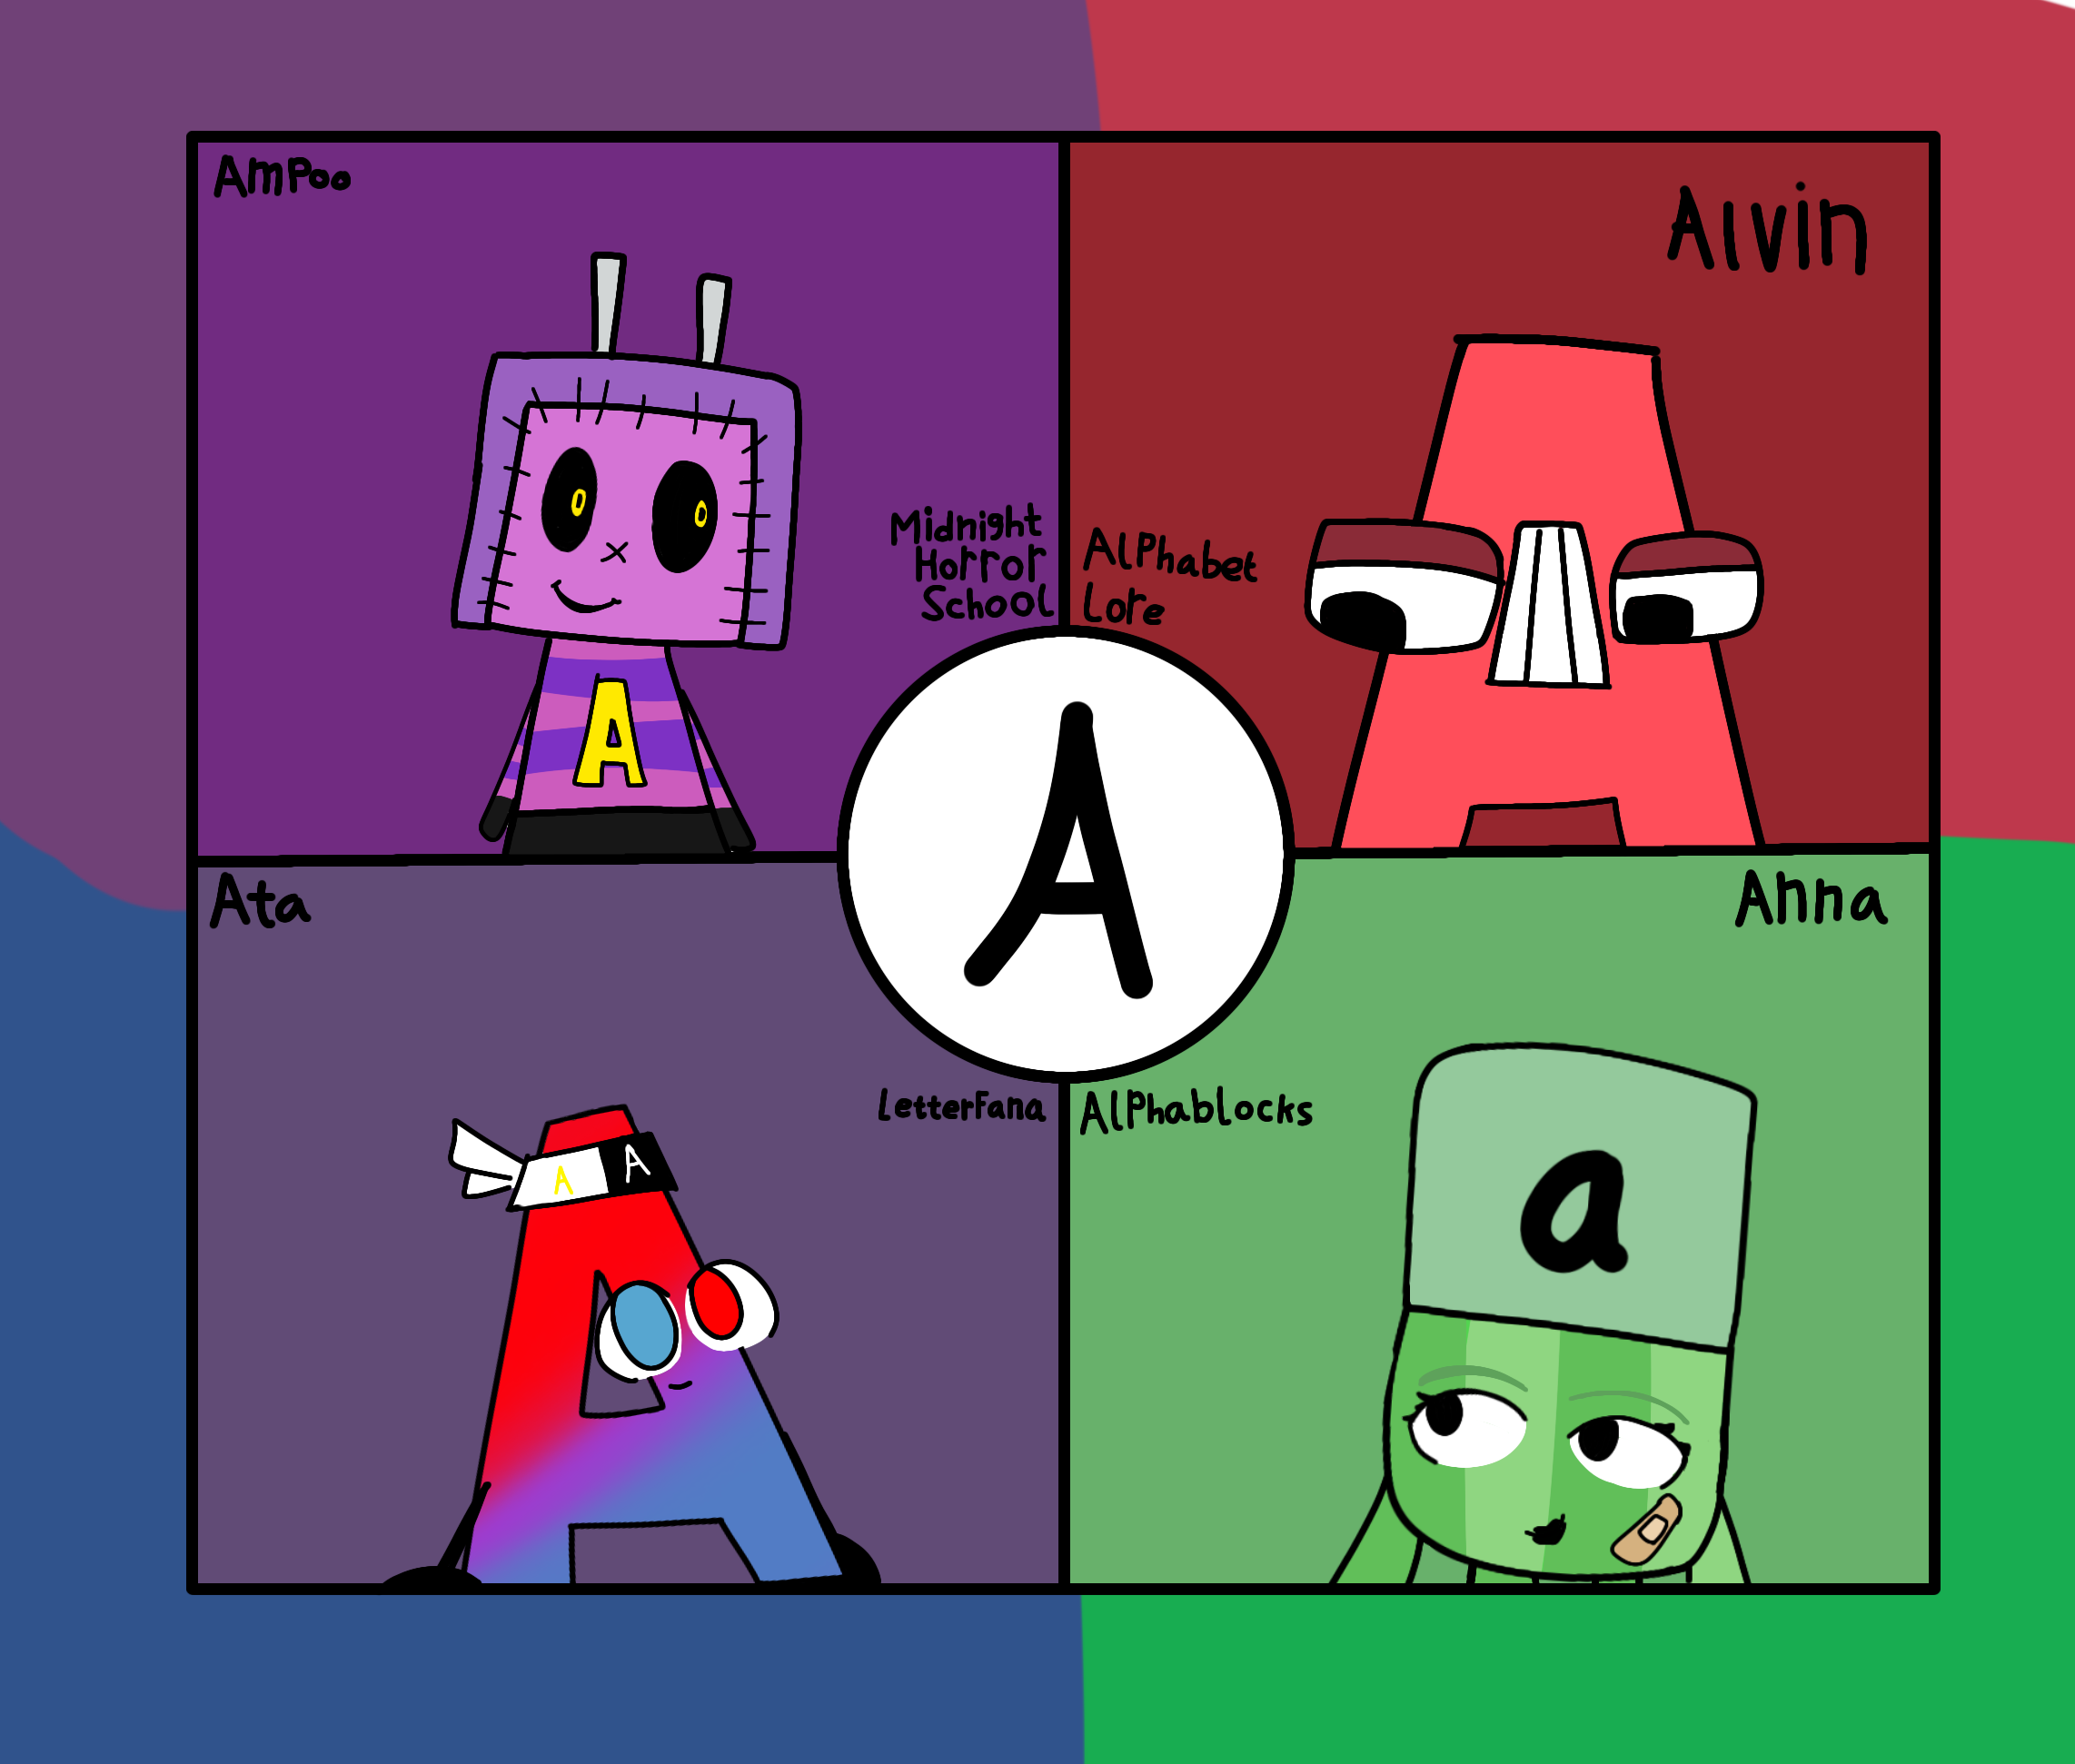 Alphabet Lore (As Numberblocks Style (A-G) Sorry if it's Rushed) 